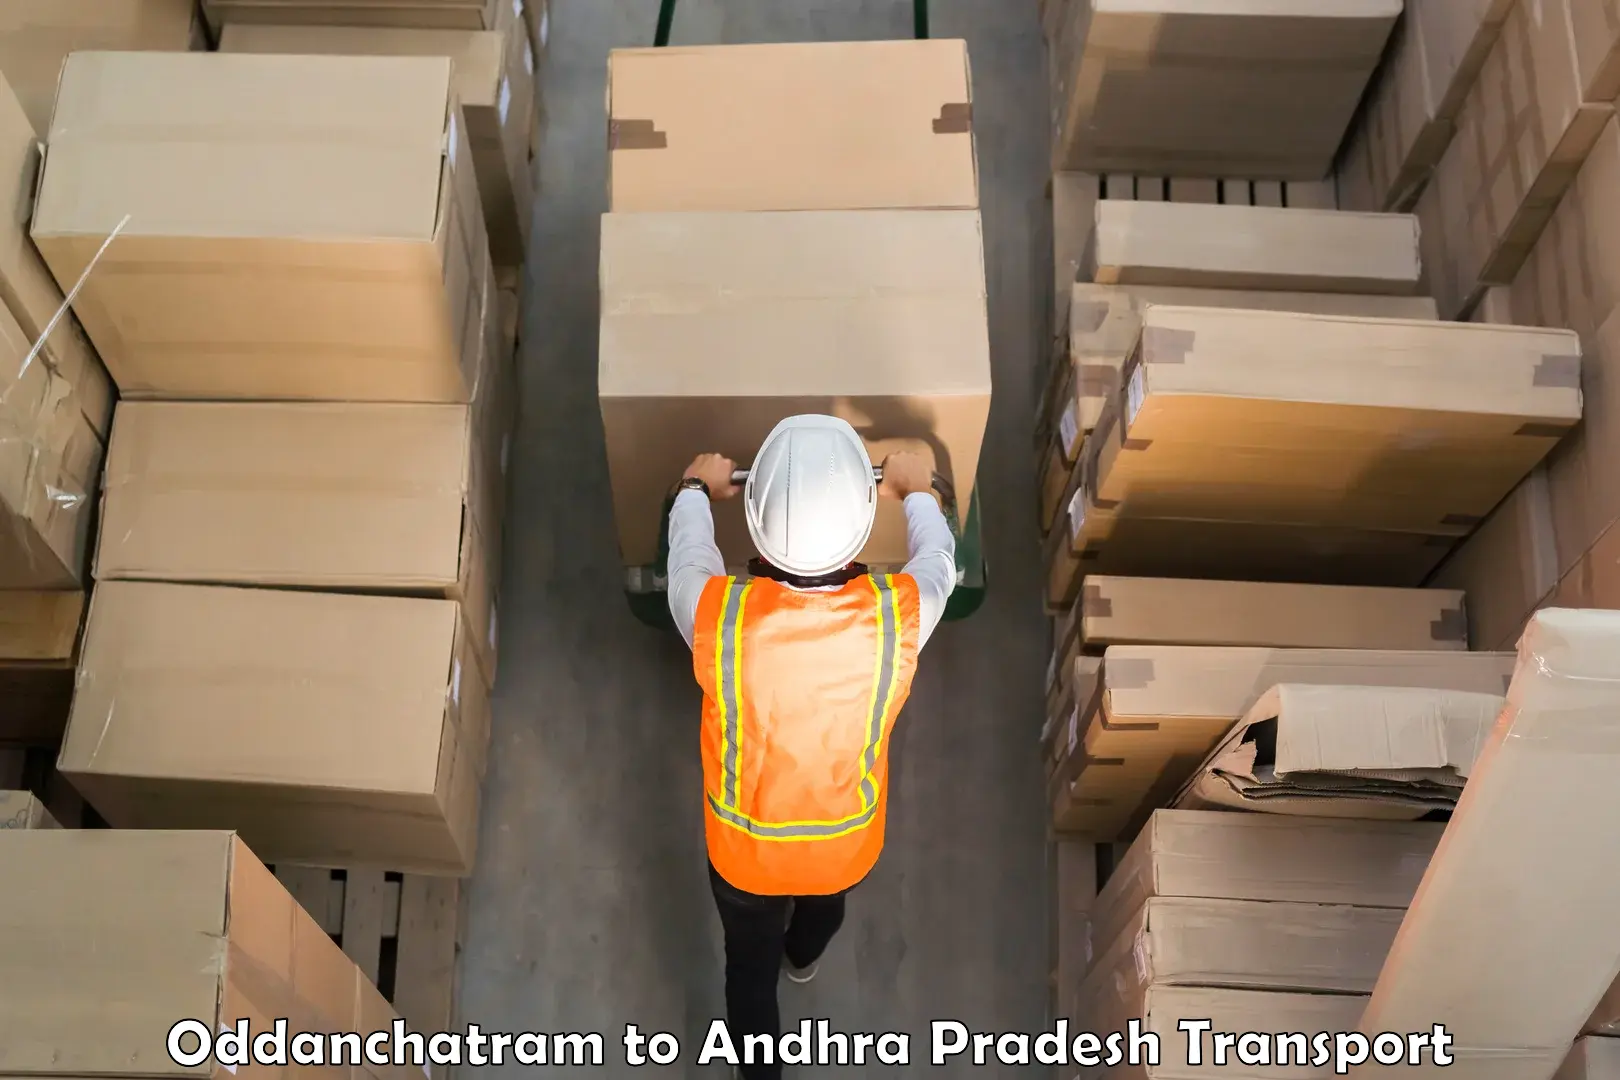 Domestic goods transportation services in Oddanchatram to Pulivendula